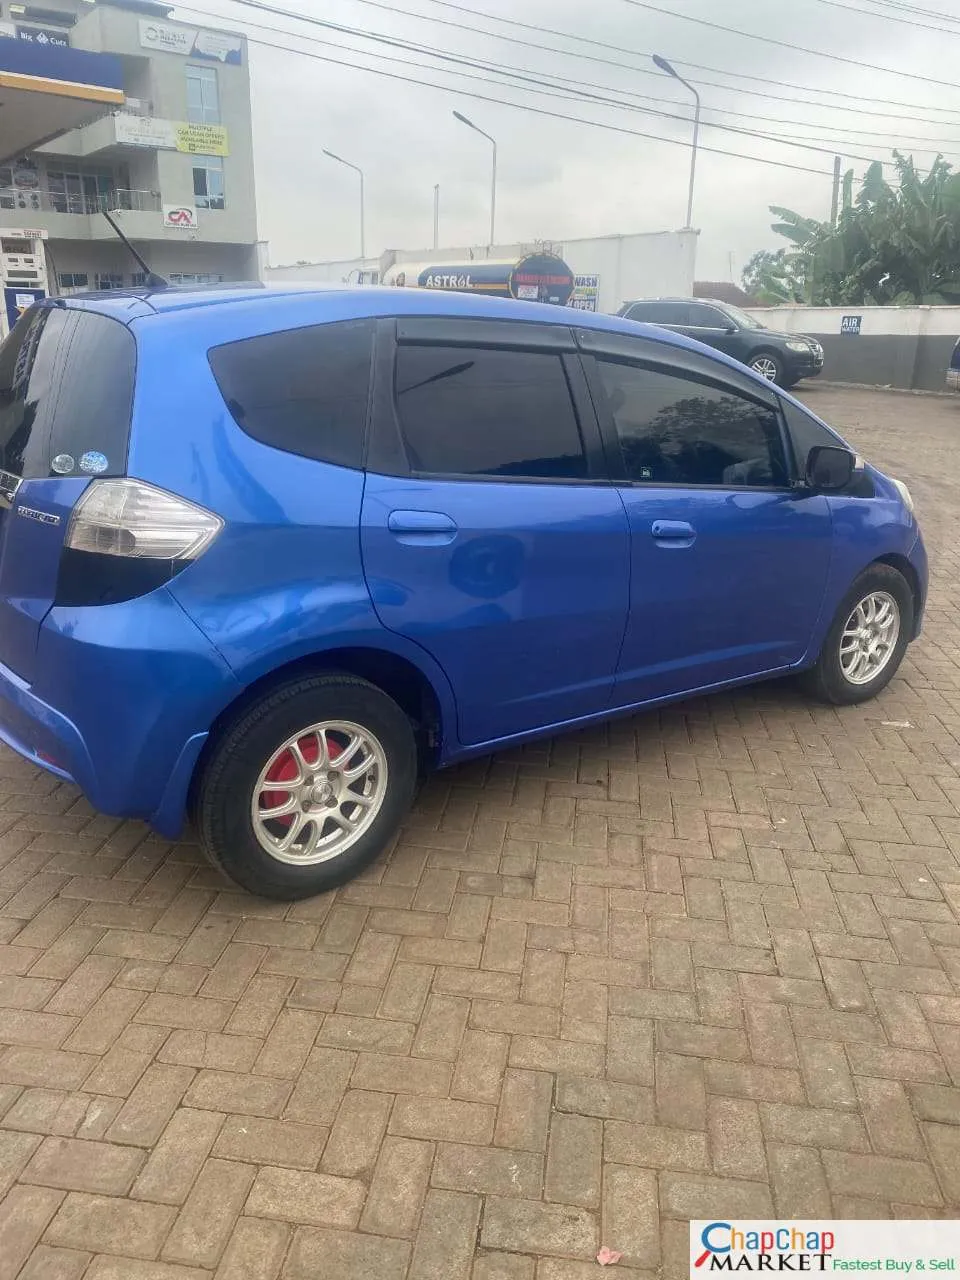 Cars Cars For Sale/Vehicles-Honda fit hybrid for sale in Kenya You Pay 30% Deposit Trade in OK EXCLUSIVE 6